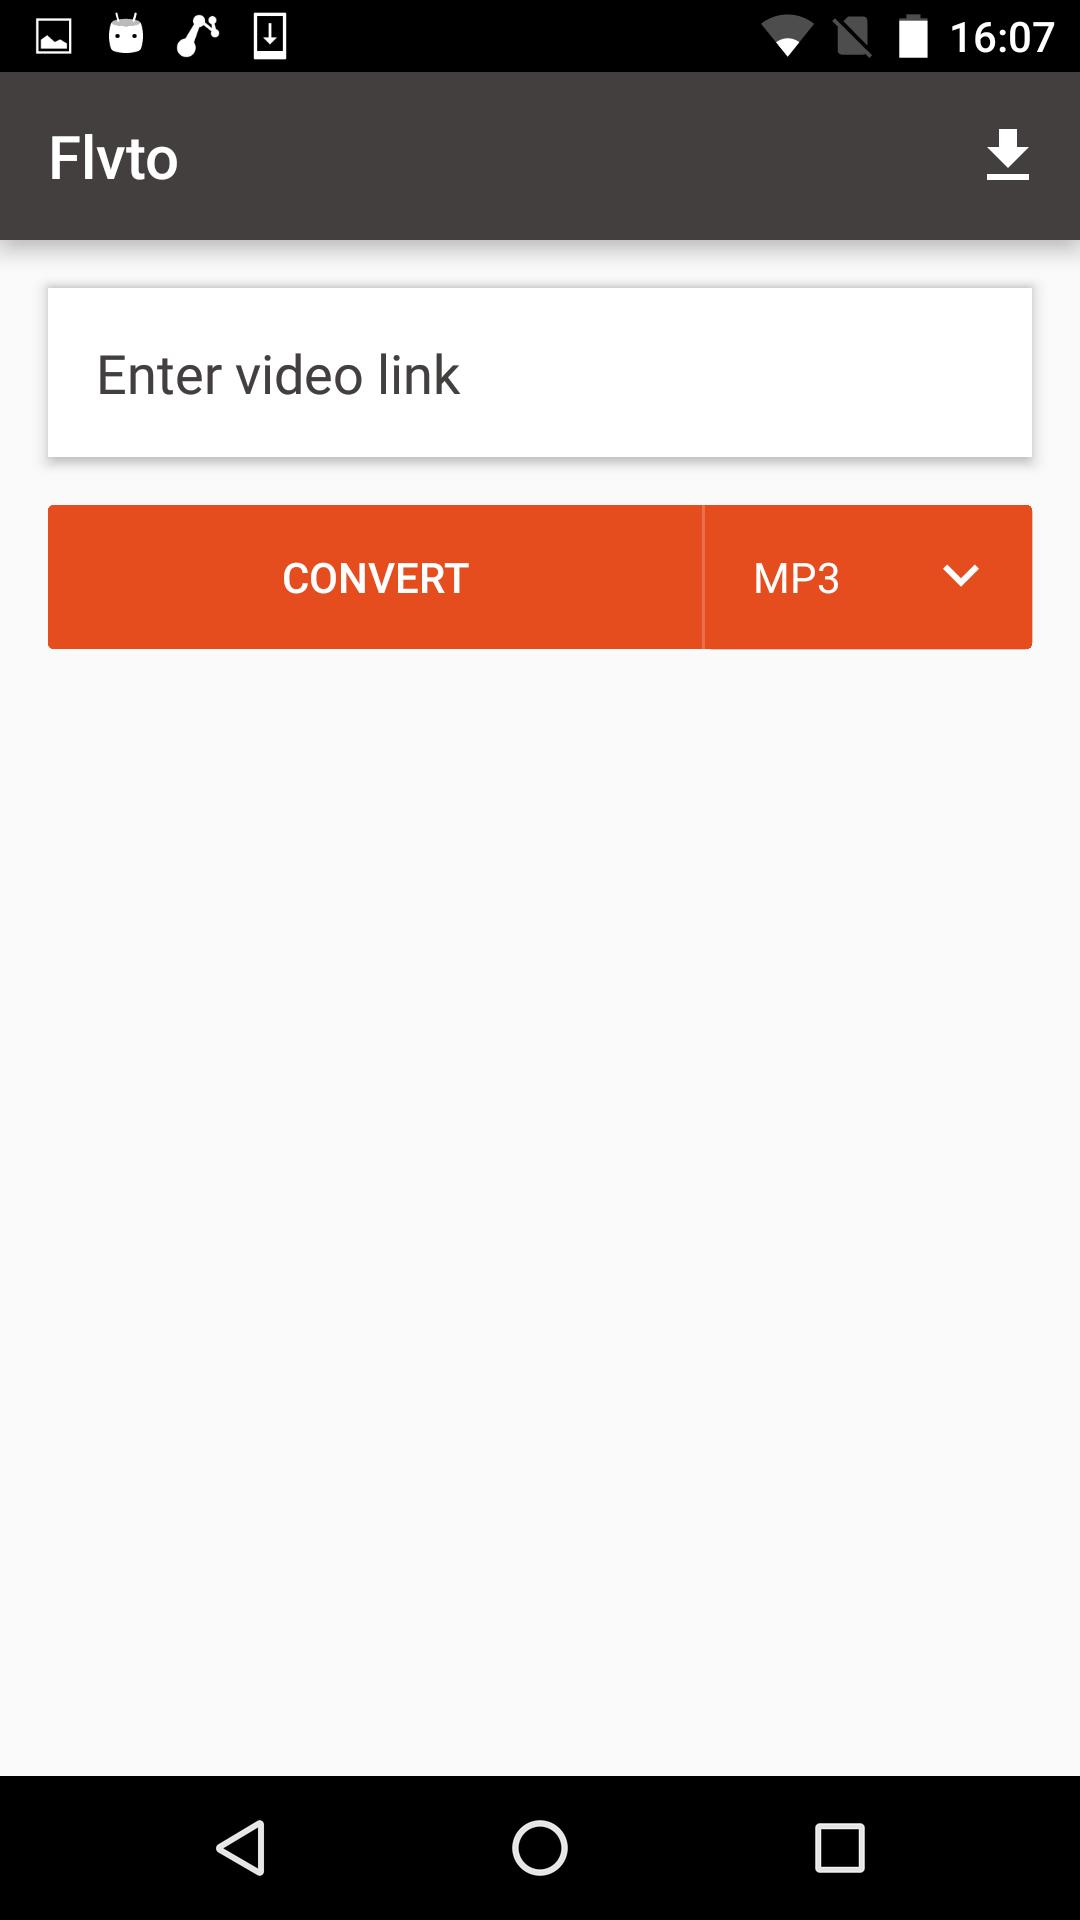 Flvto MP3 Converter for Android - APK Download